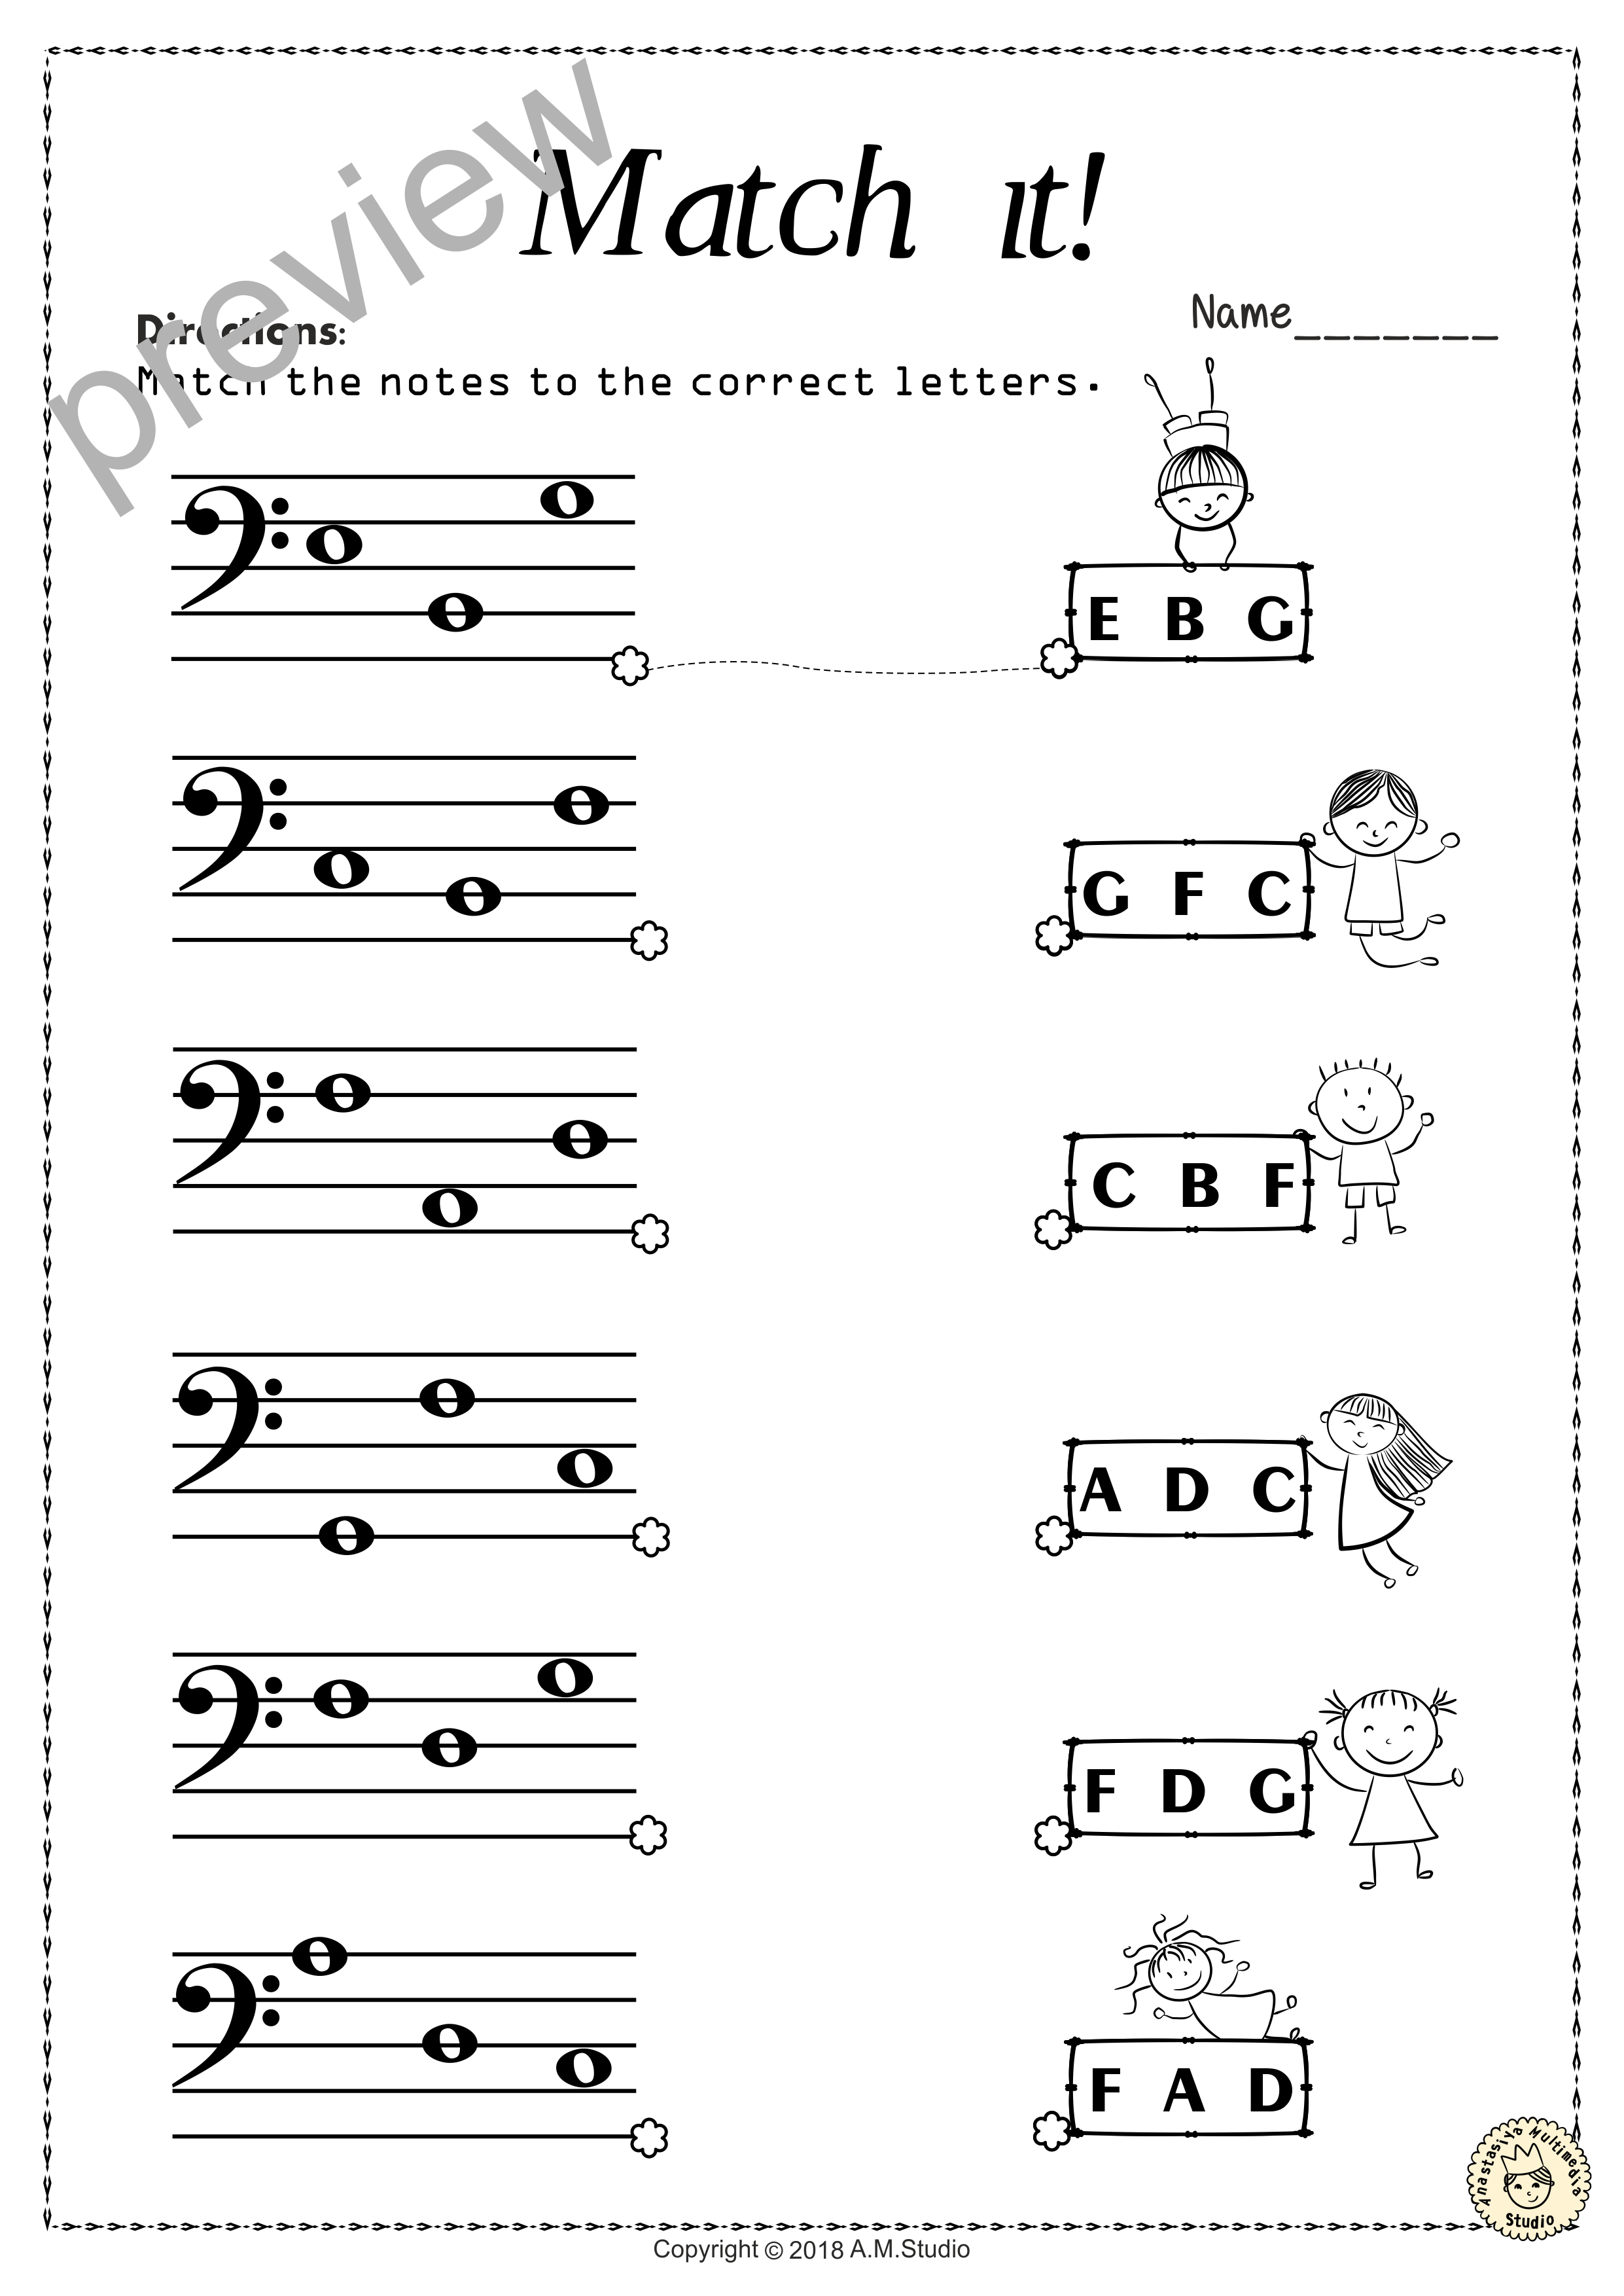 This Set Of 10 Music Worksheets Is Designed To Help Your Students 